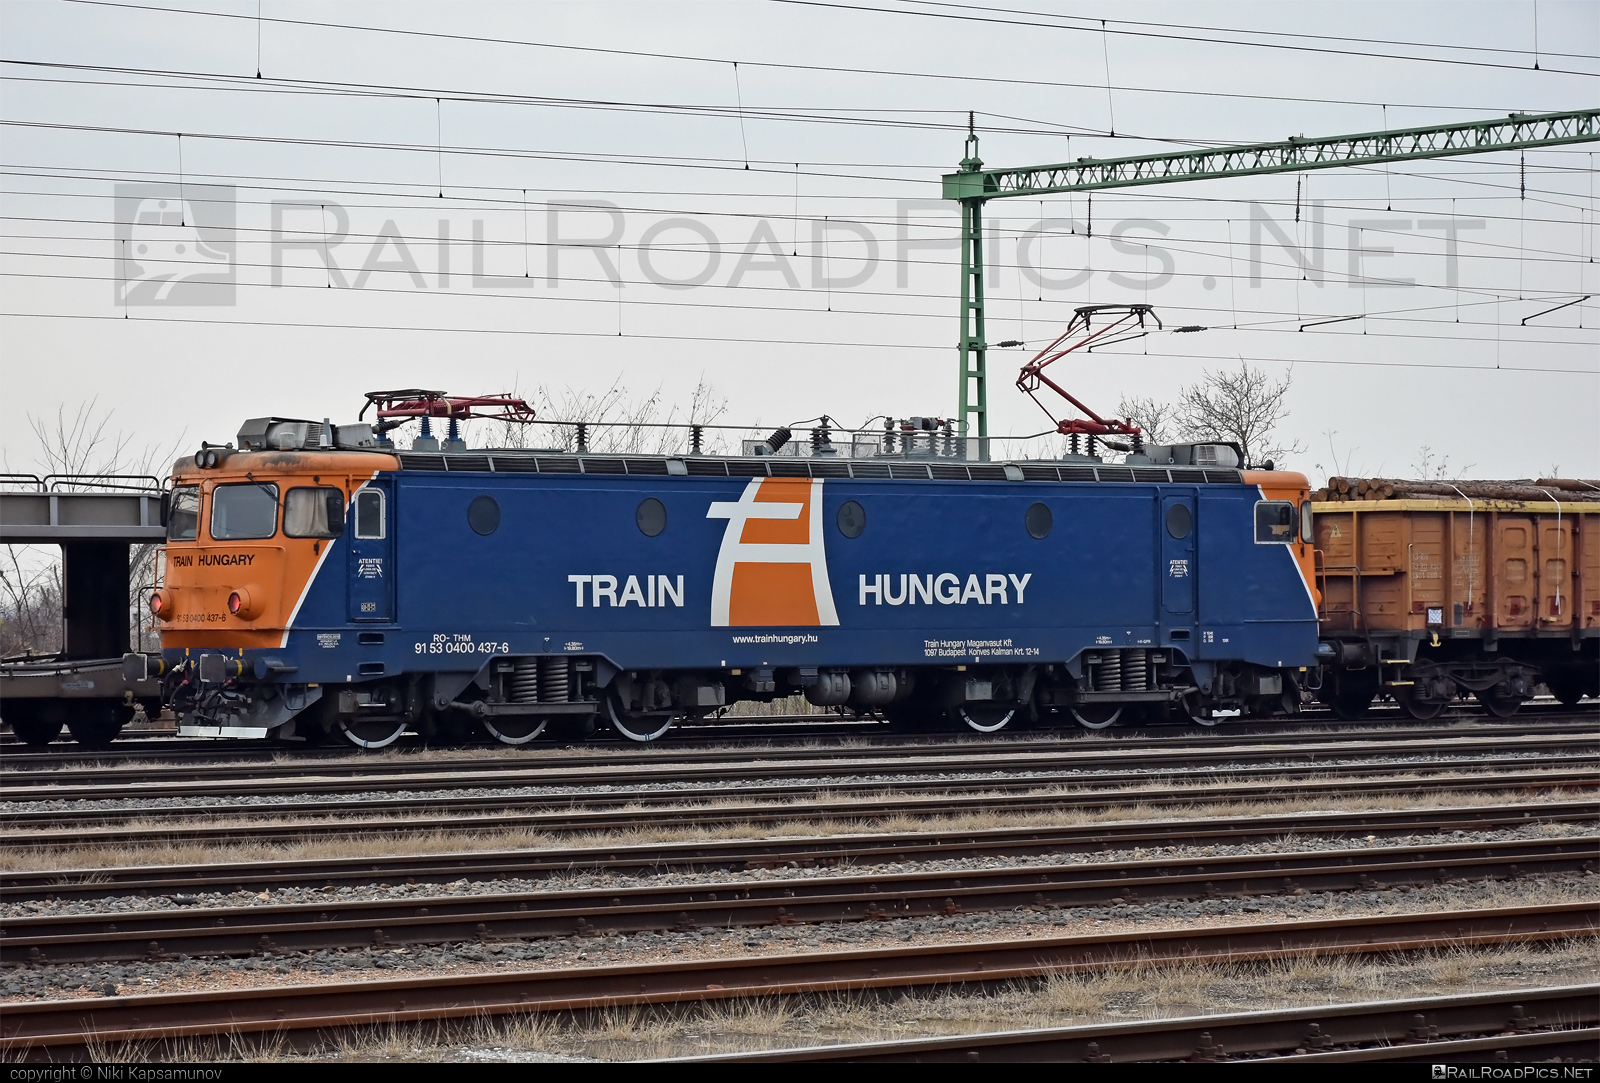 Electroputere LE 5100 - 0400 437-6 operated by Train Hungary Magánvasút Kft #TrainHungaryMaganvasut #TrainHungaryMaganvasutKft #electroputere #electroputerecraiova #electroputerele5100 #le5100 #trainhungary